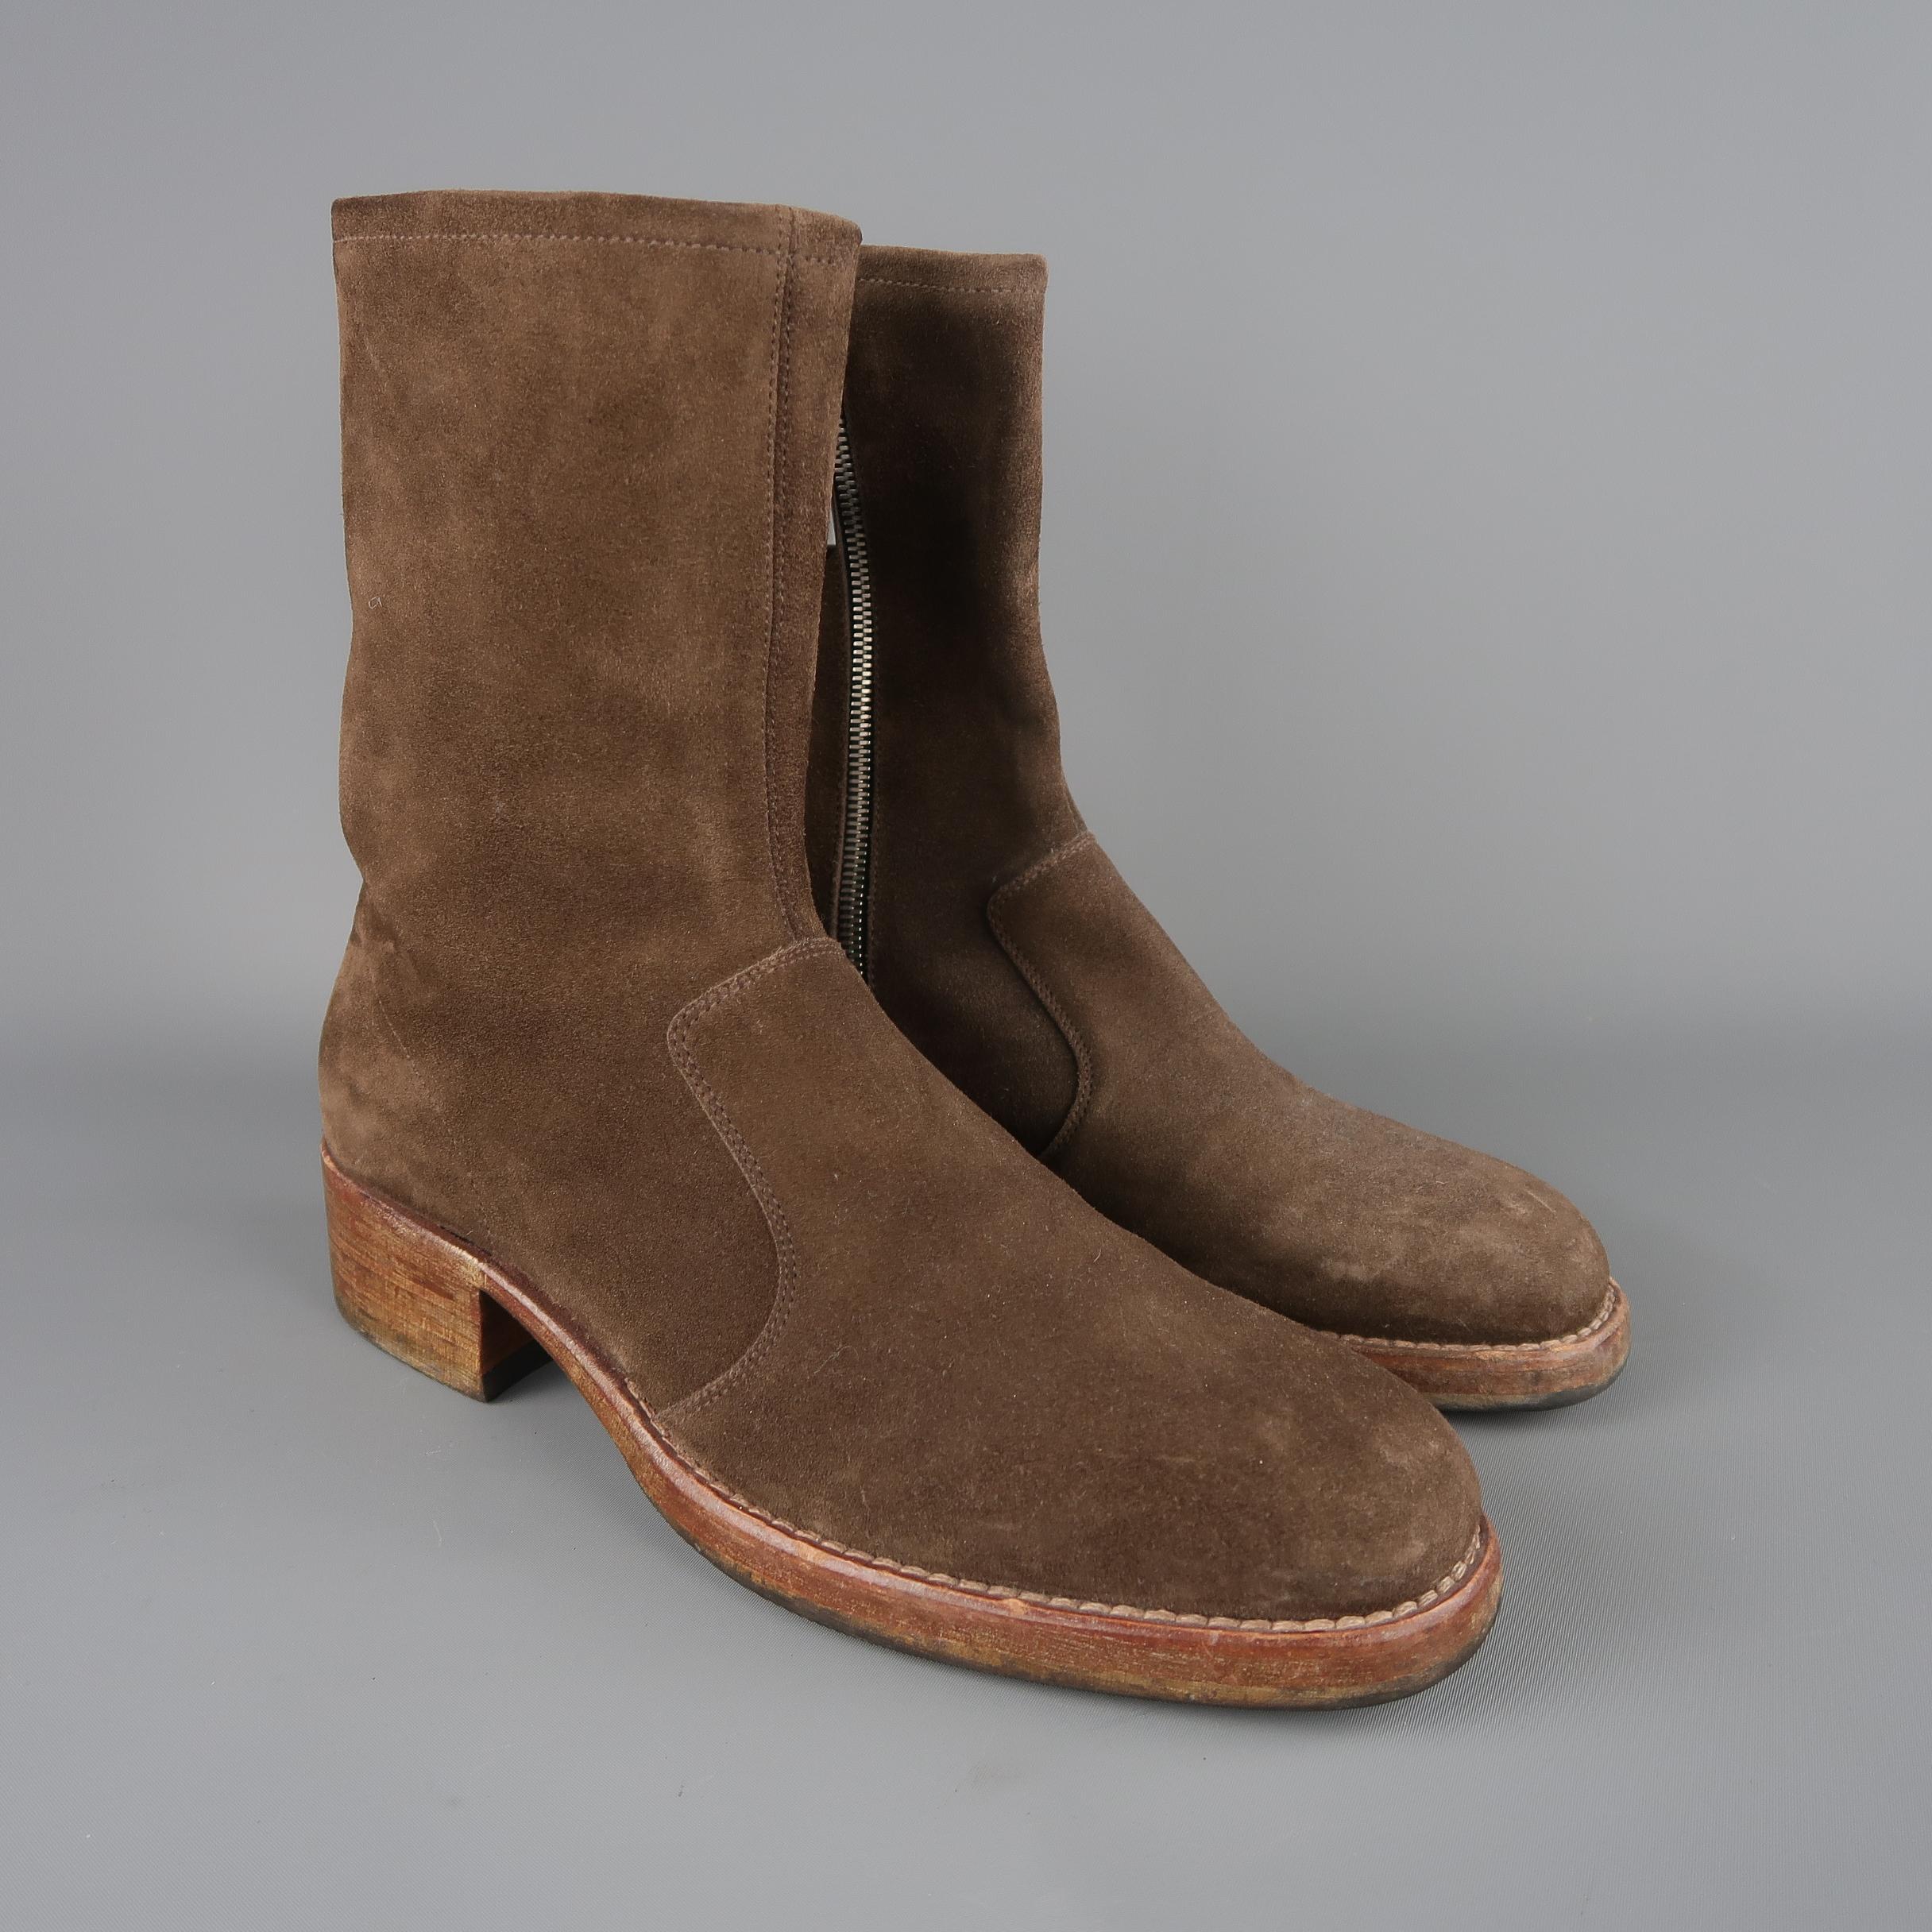 Maison Martin Margiela ankle boots come in brown suede with a squared round toe, inner zip closure, and distressed brick colored heeled, stacked sole. Made in Italy.
 
Good Pre-Owned Condition.
Marked: IT 43
 
Measurements:
 
Length: 8.5 in.